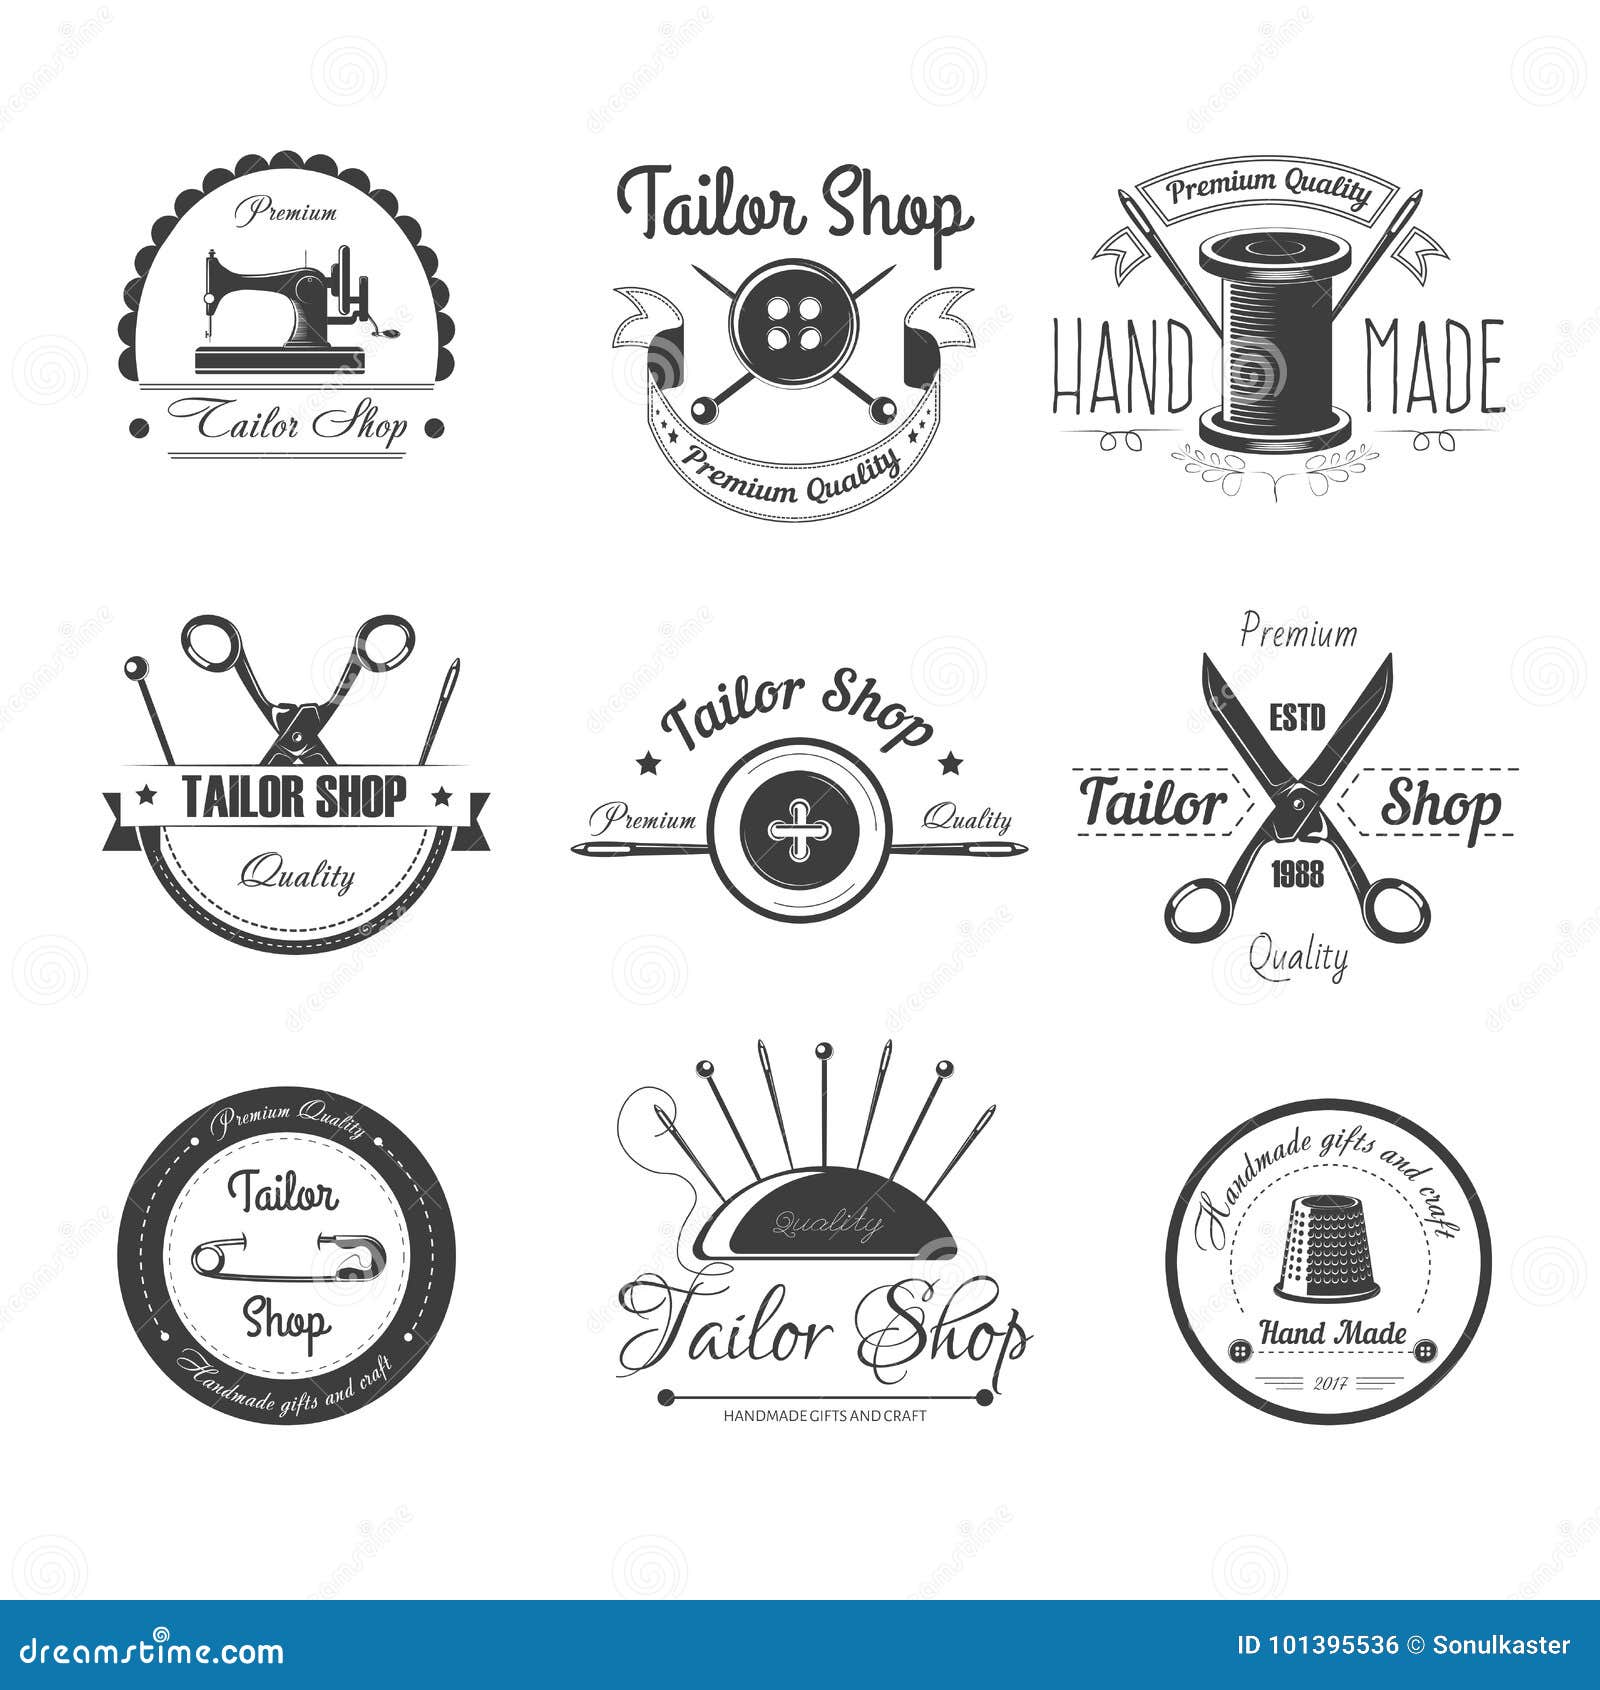 Tailor Shop Salon Vector Icons Button, Sewing Needle or Scissors and ...